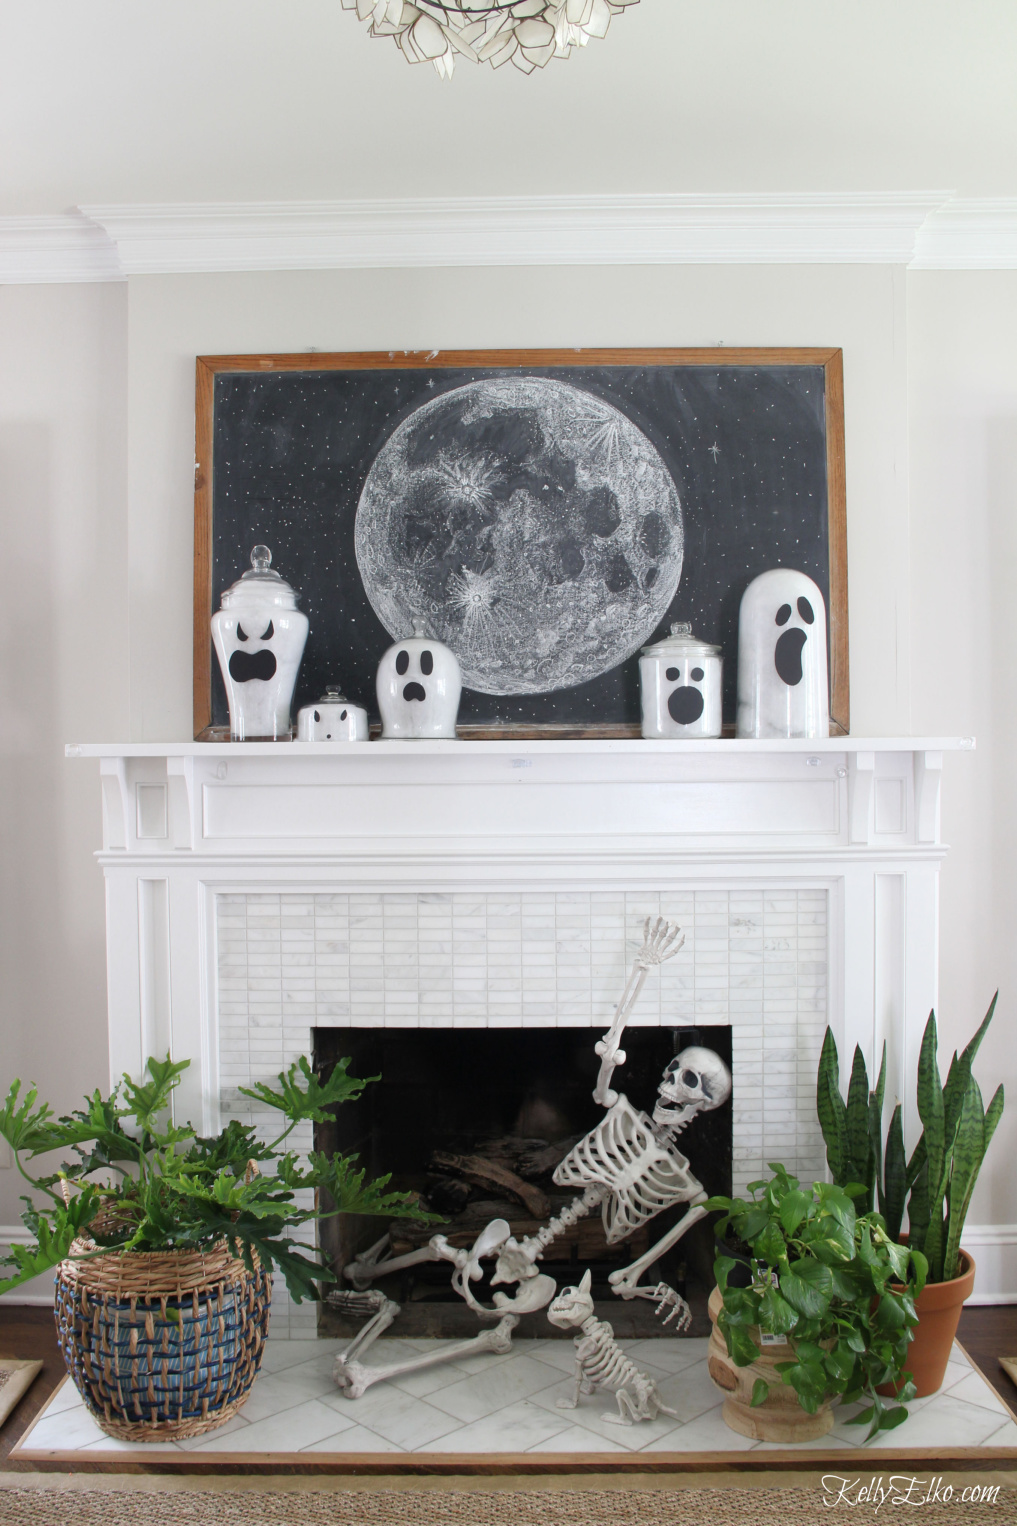 Love this Halloween mantel with the skeleton in the fireplace and she shows how to make glass jar ghosts! - kellyelko.com #halloween #halloweencrafts #halloweendecor #halloweendecorations #diyhalloween #diyhalloweendecorations #ghosts #skeleton #halloweenhouse #halloweenmantel #vintagehalloween